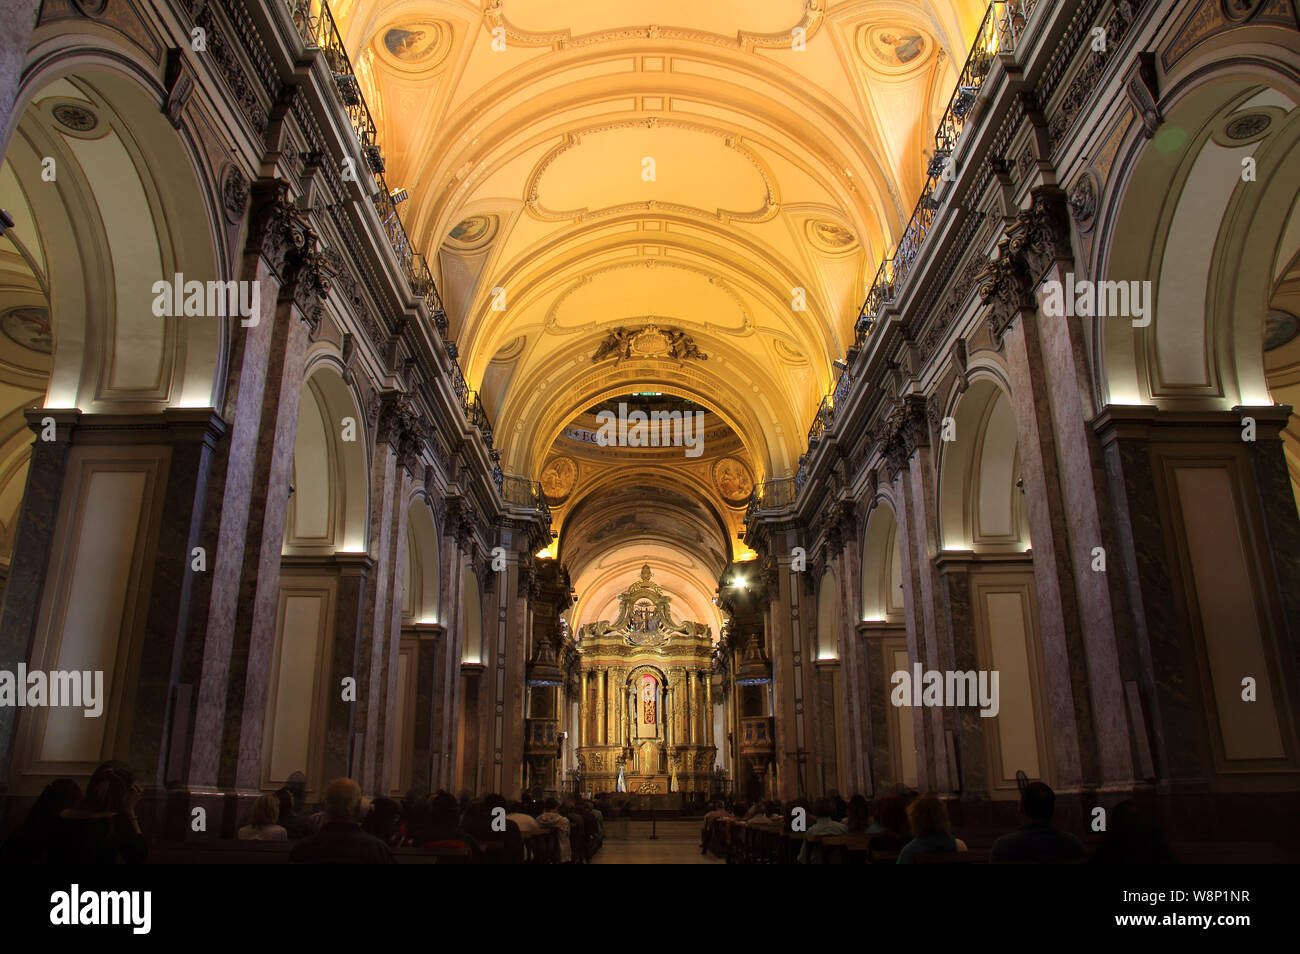 Buenos Aires Metropolitan Cathedral, with its elegant interior, serves as the main center of Catholicism in Buenos Aires, capital city of Argentina Stock Photo